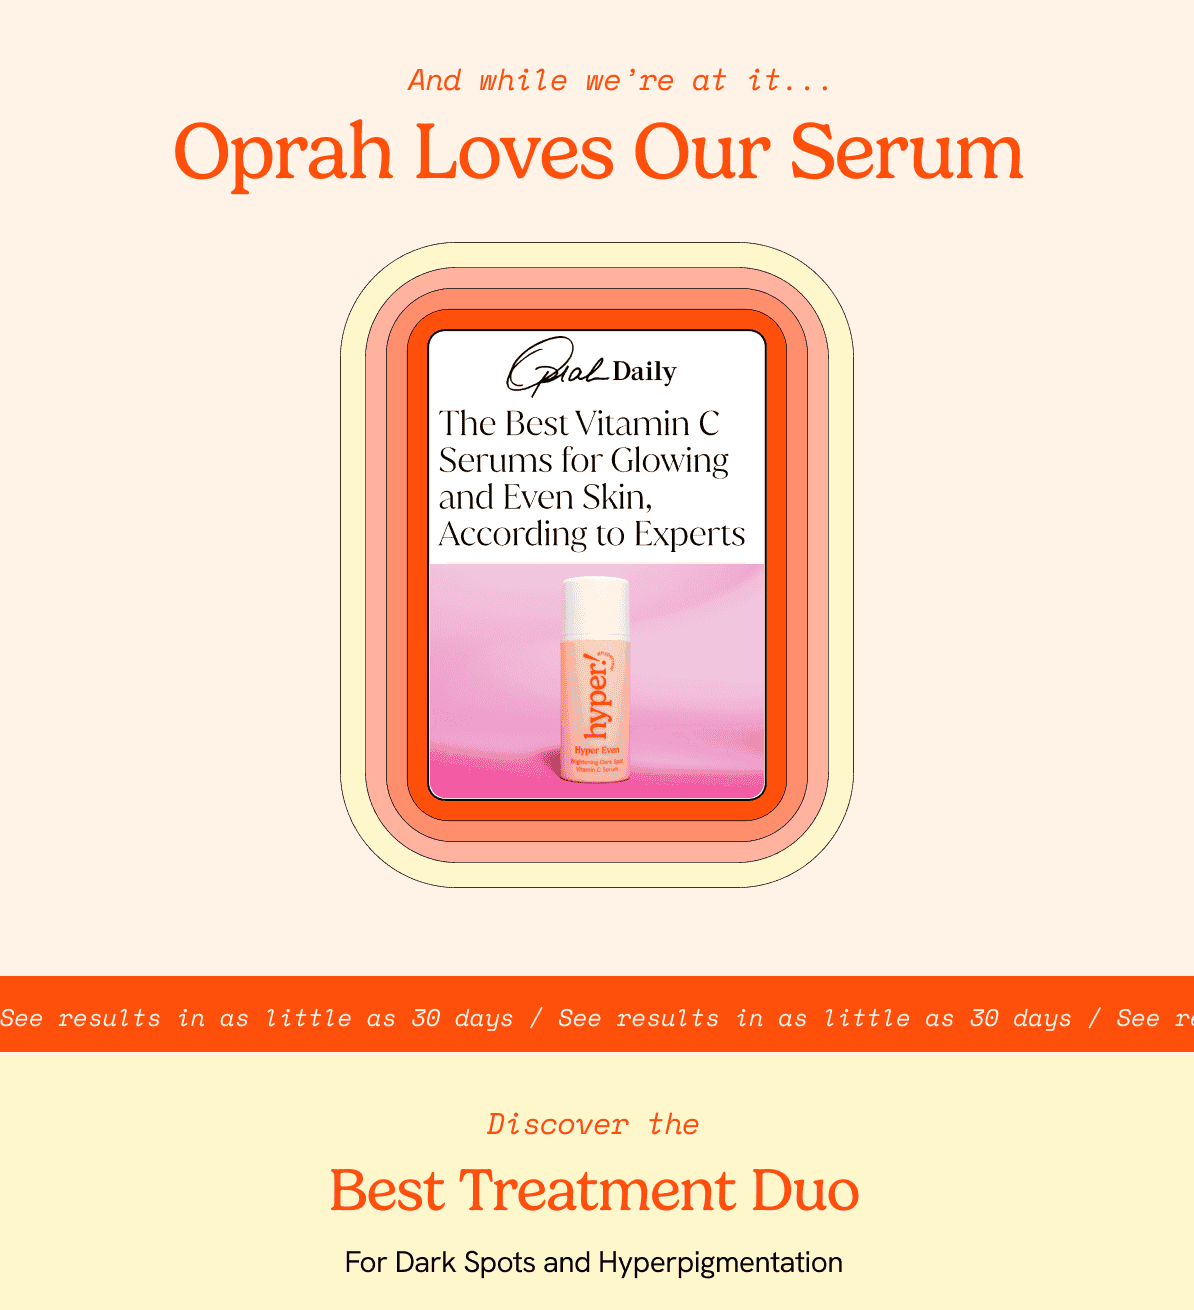 And Oprah loves our serum